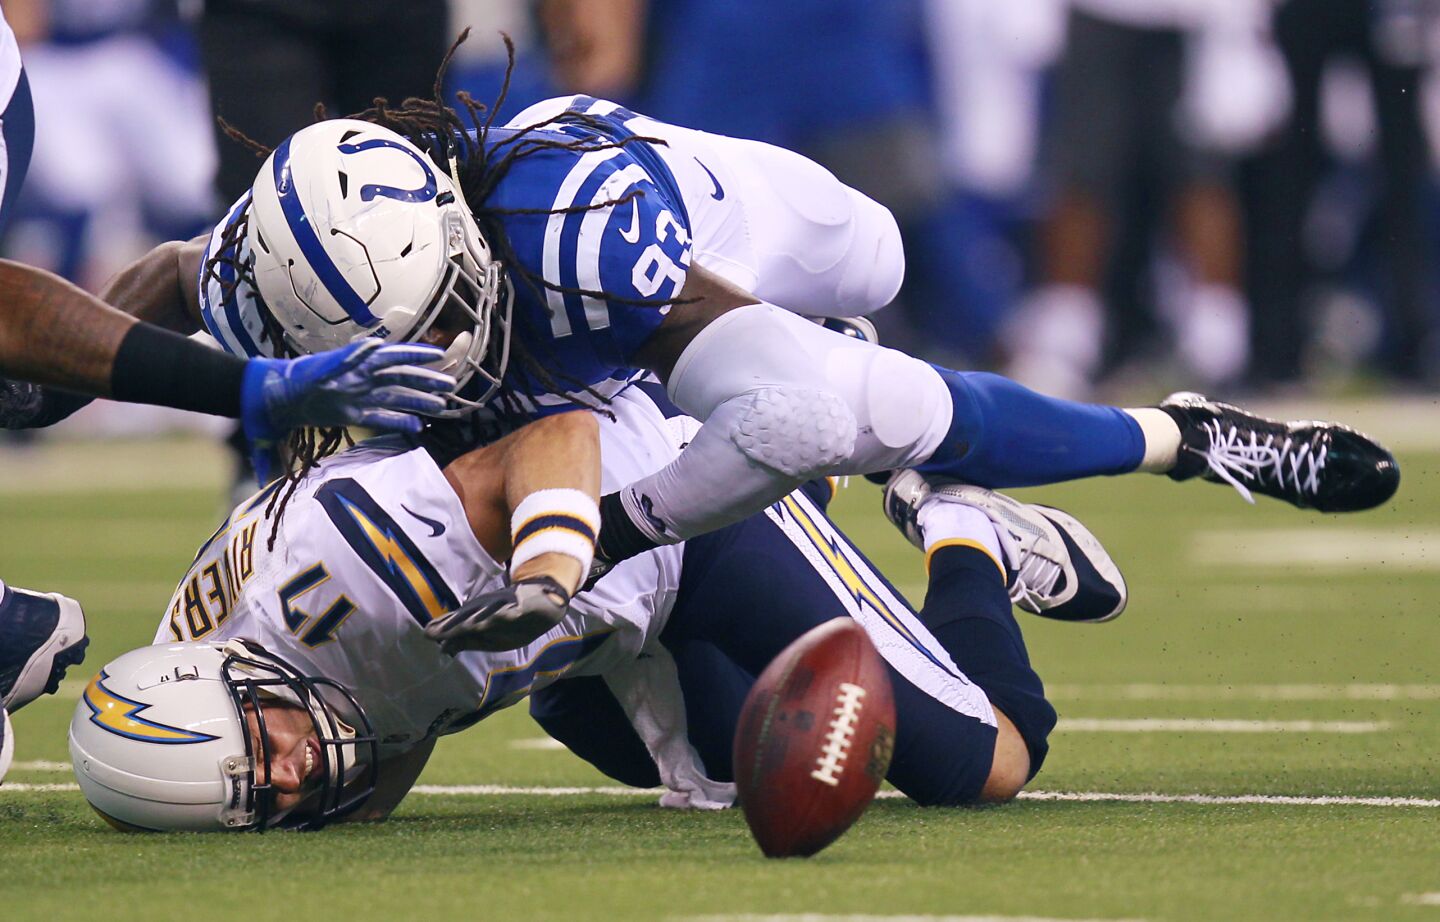 San Diego Chargers Philip Rivers fumbles as Colts Erik Walden hits him in the 2nd quarter at Lucas Oil Stadium on Sunday, Sept. 25, 2016.